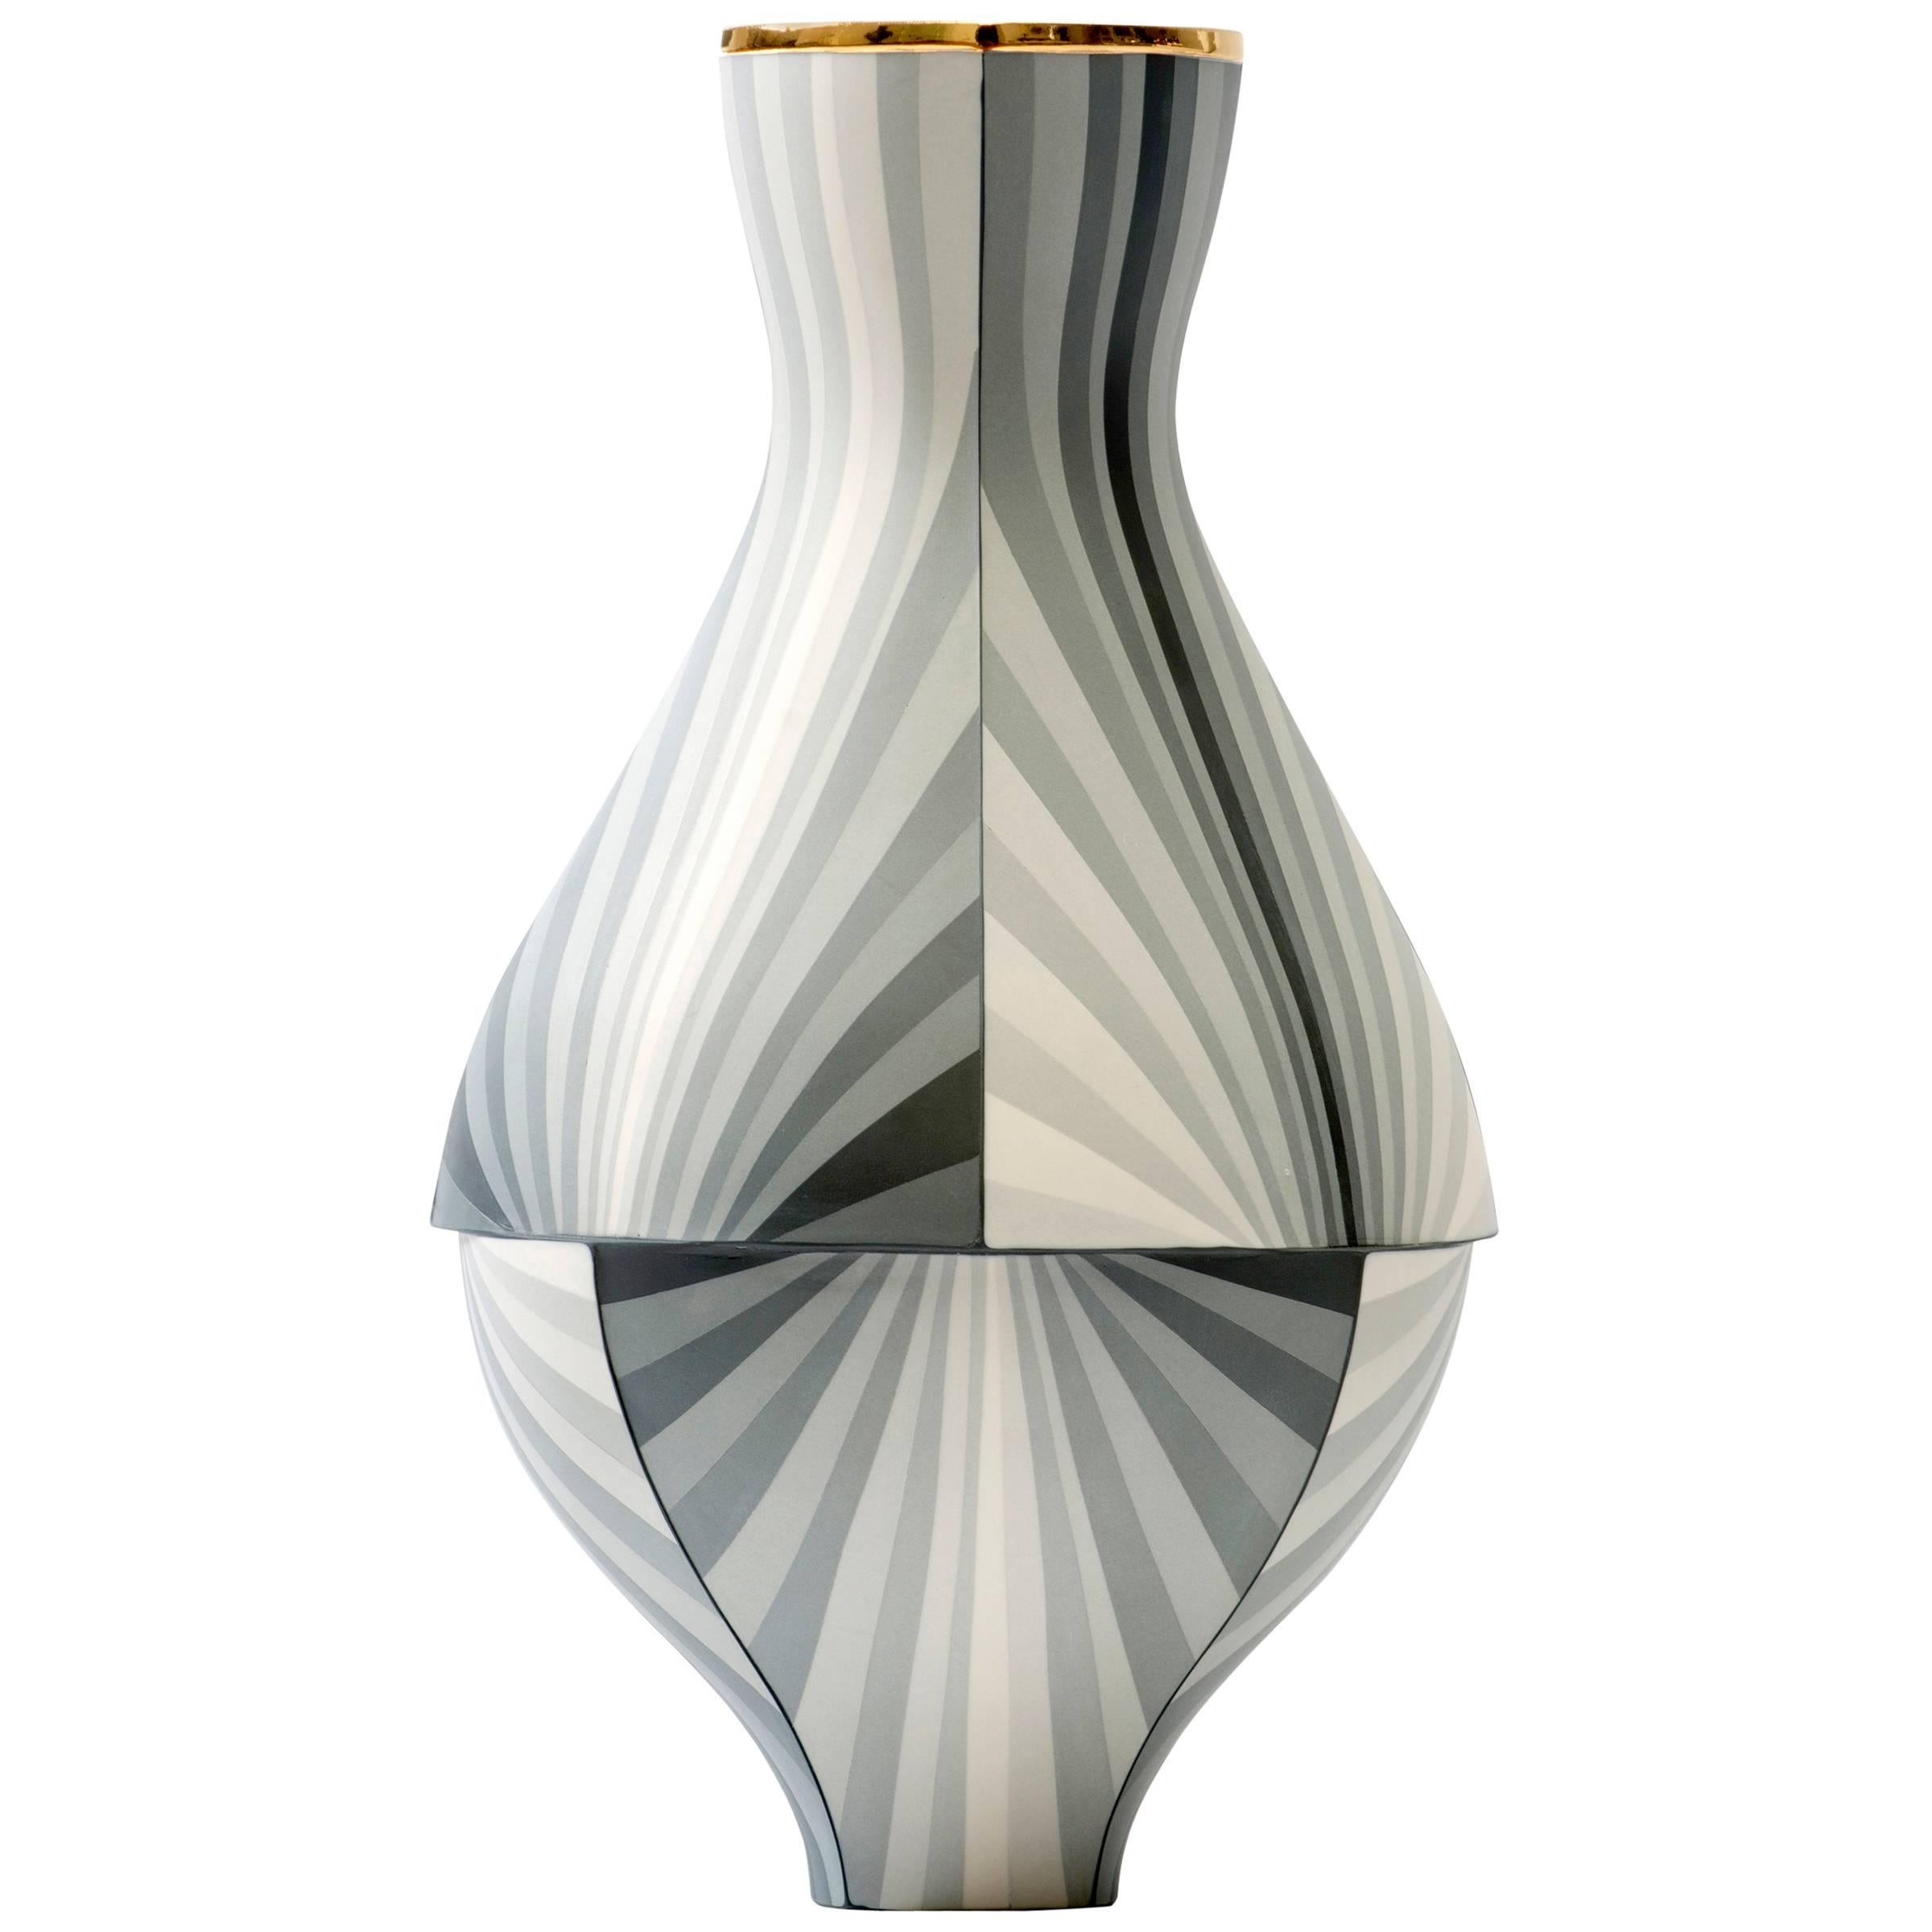 Contemporary Vase in Gray Gradient Colored Porcelain Vessel